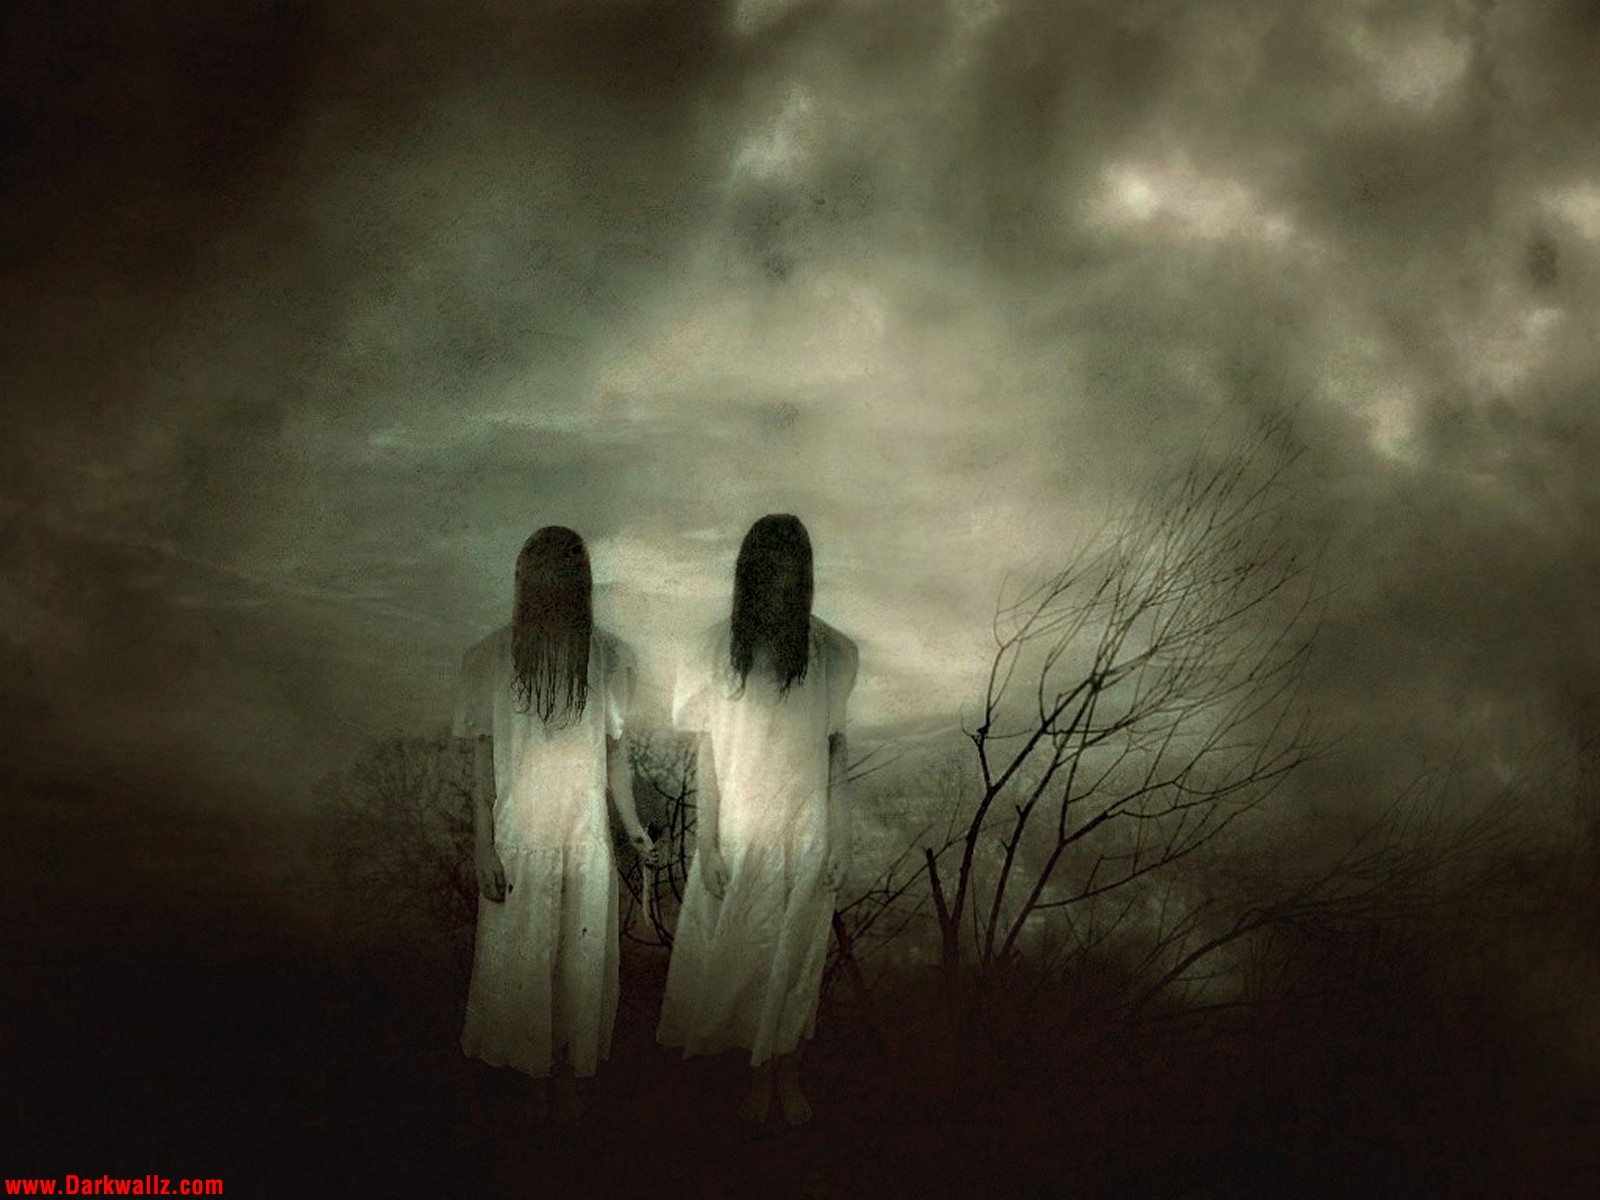 Free download Scary black themed horror wallpapers 1 Design Utopia Trend [1600x1200] for your